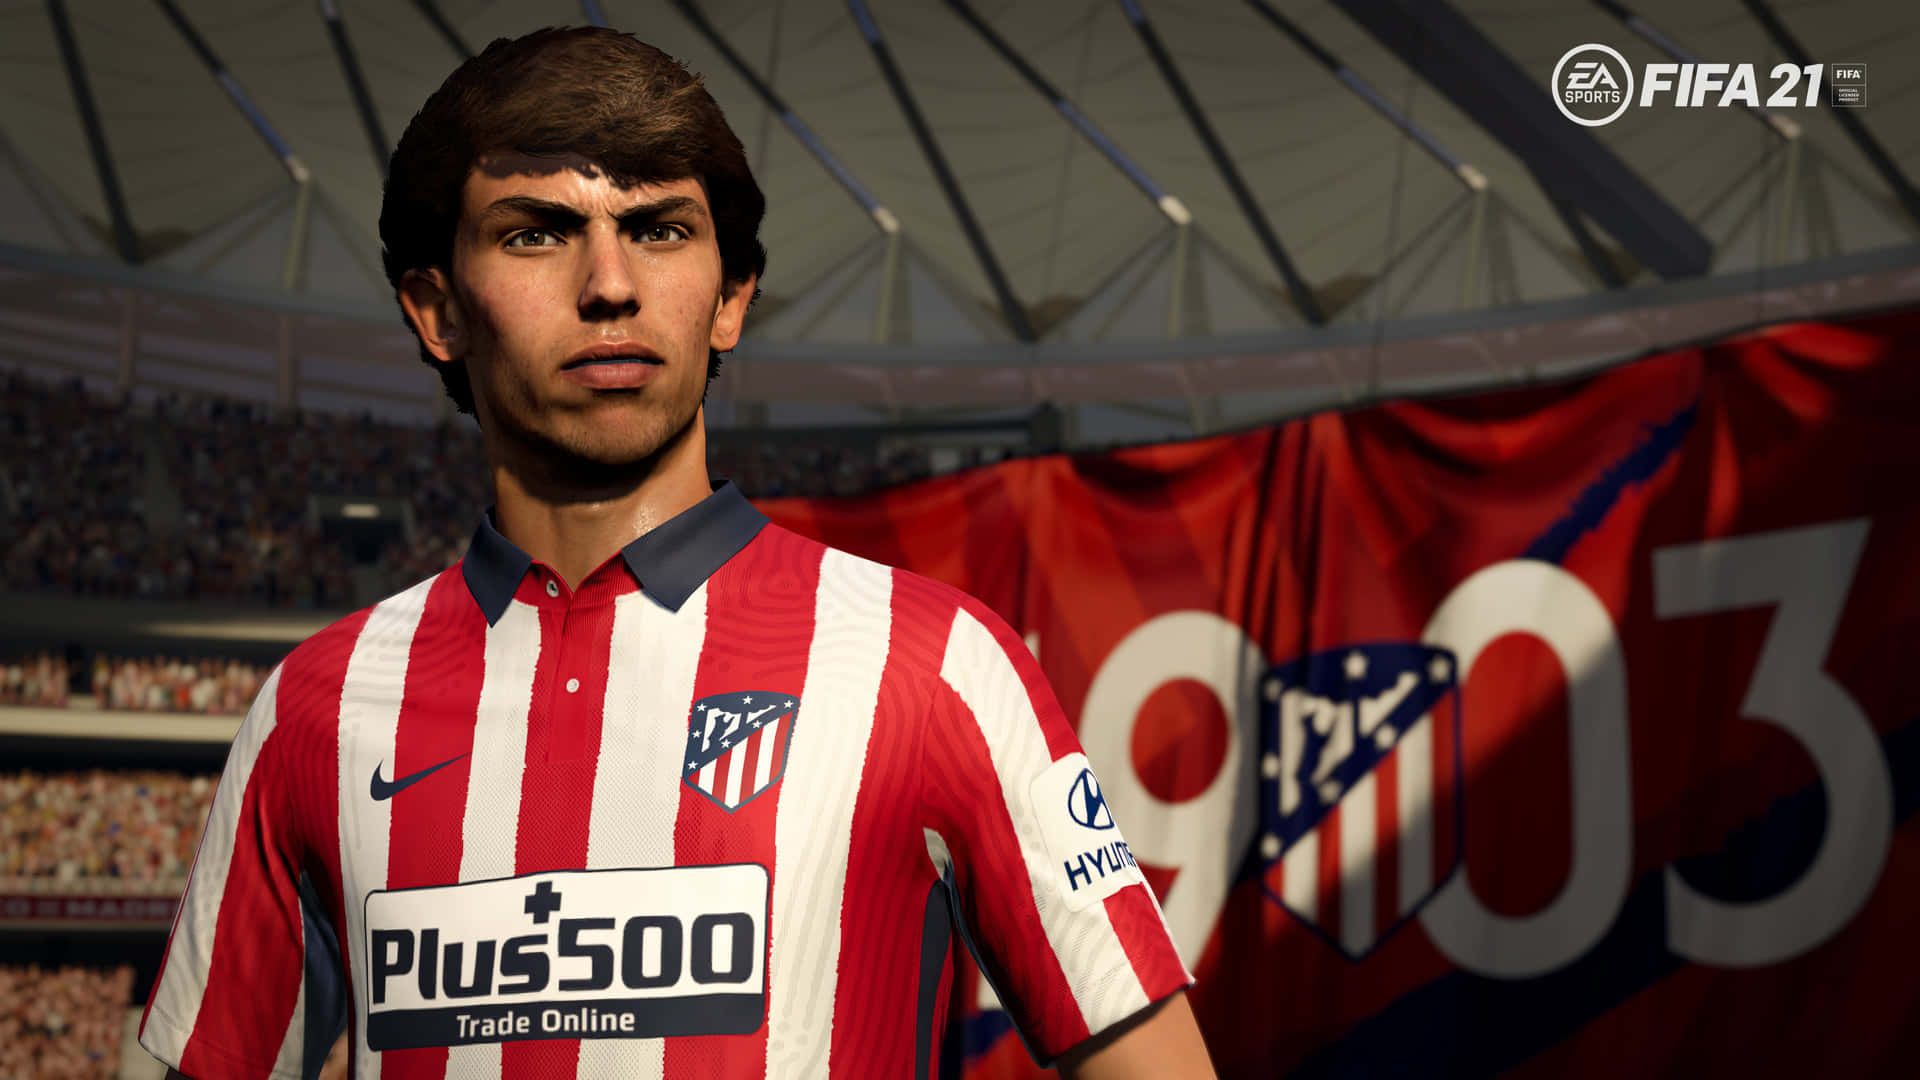 Take A Whirl Through The Fast Pace Of FIFA 21